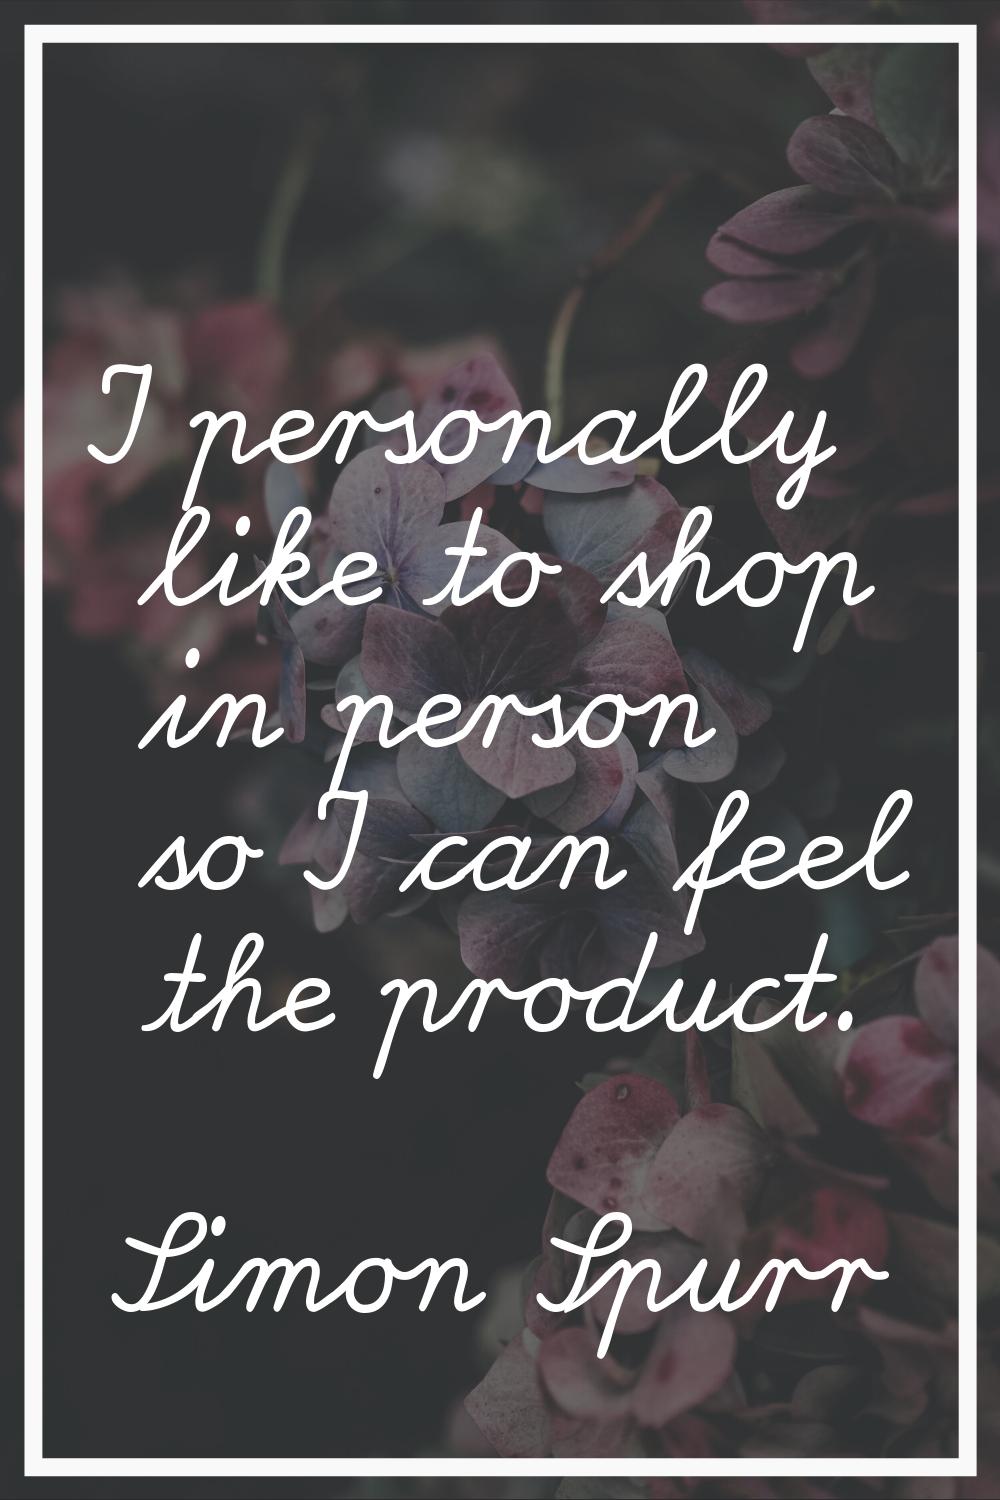 I personally like to shop in person so I can feel the product.